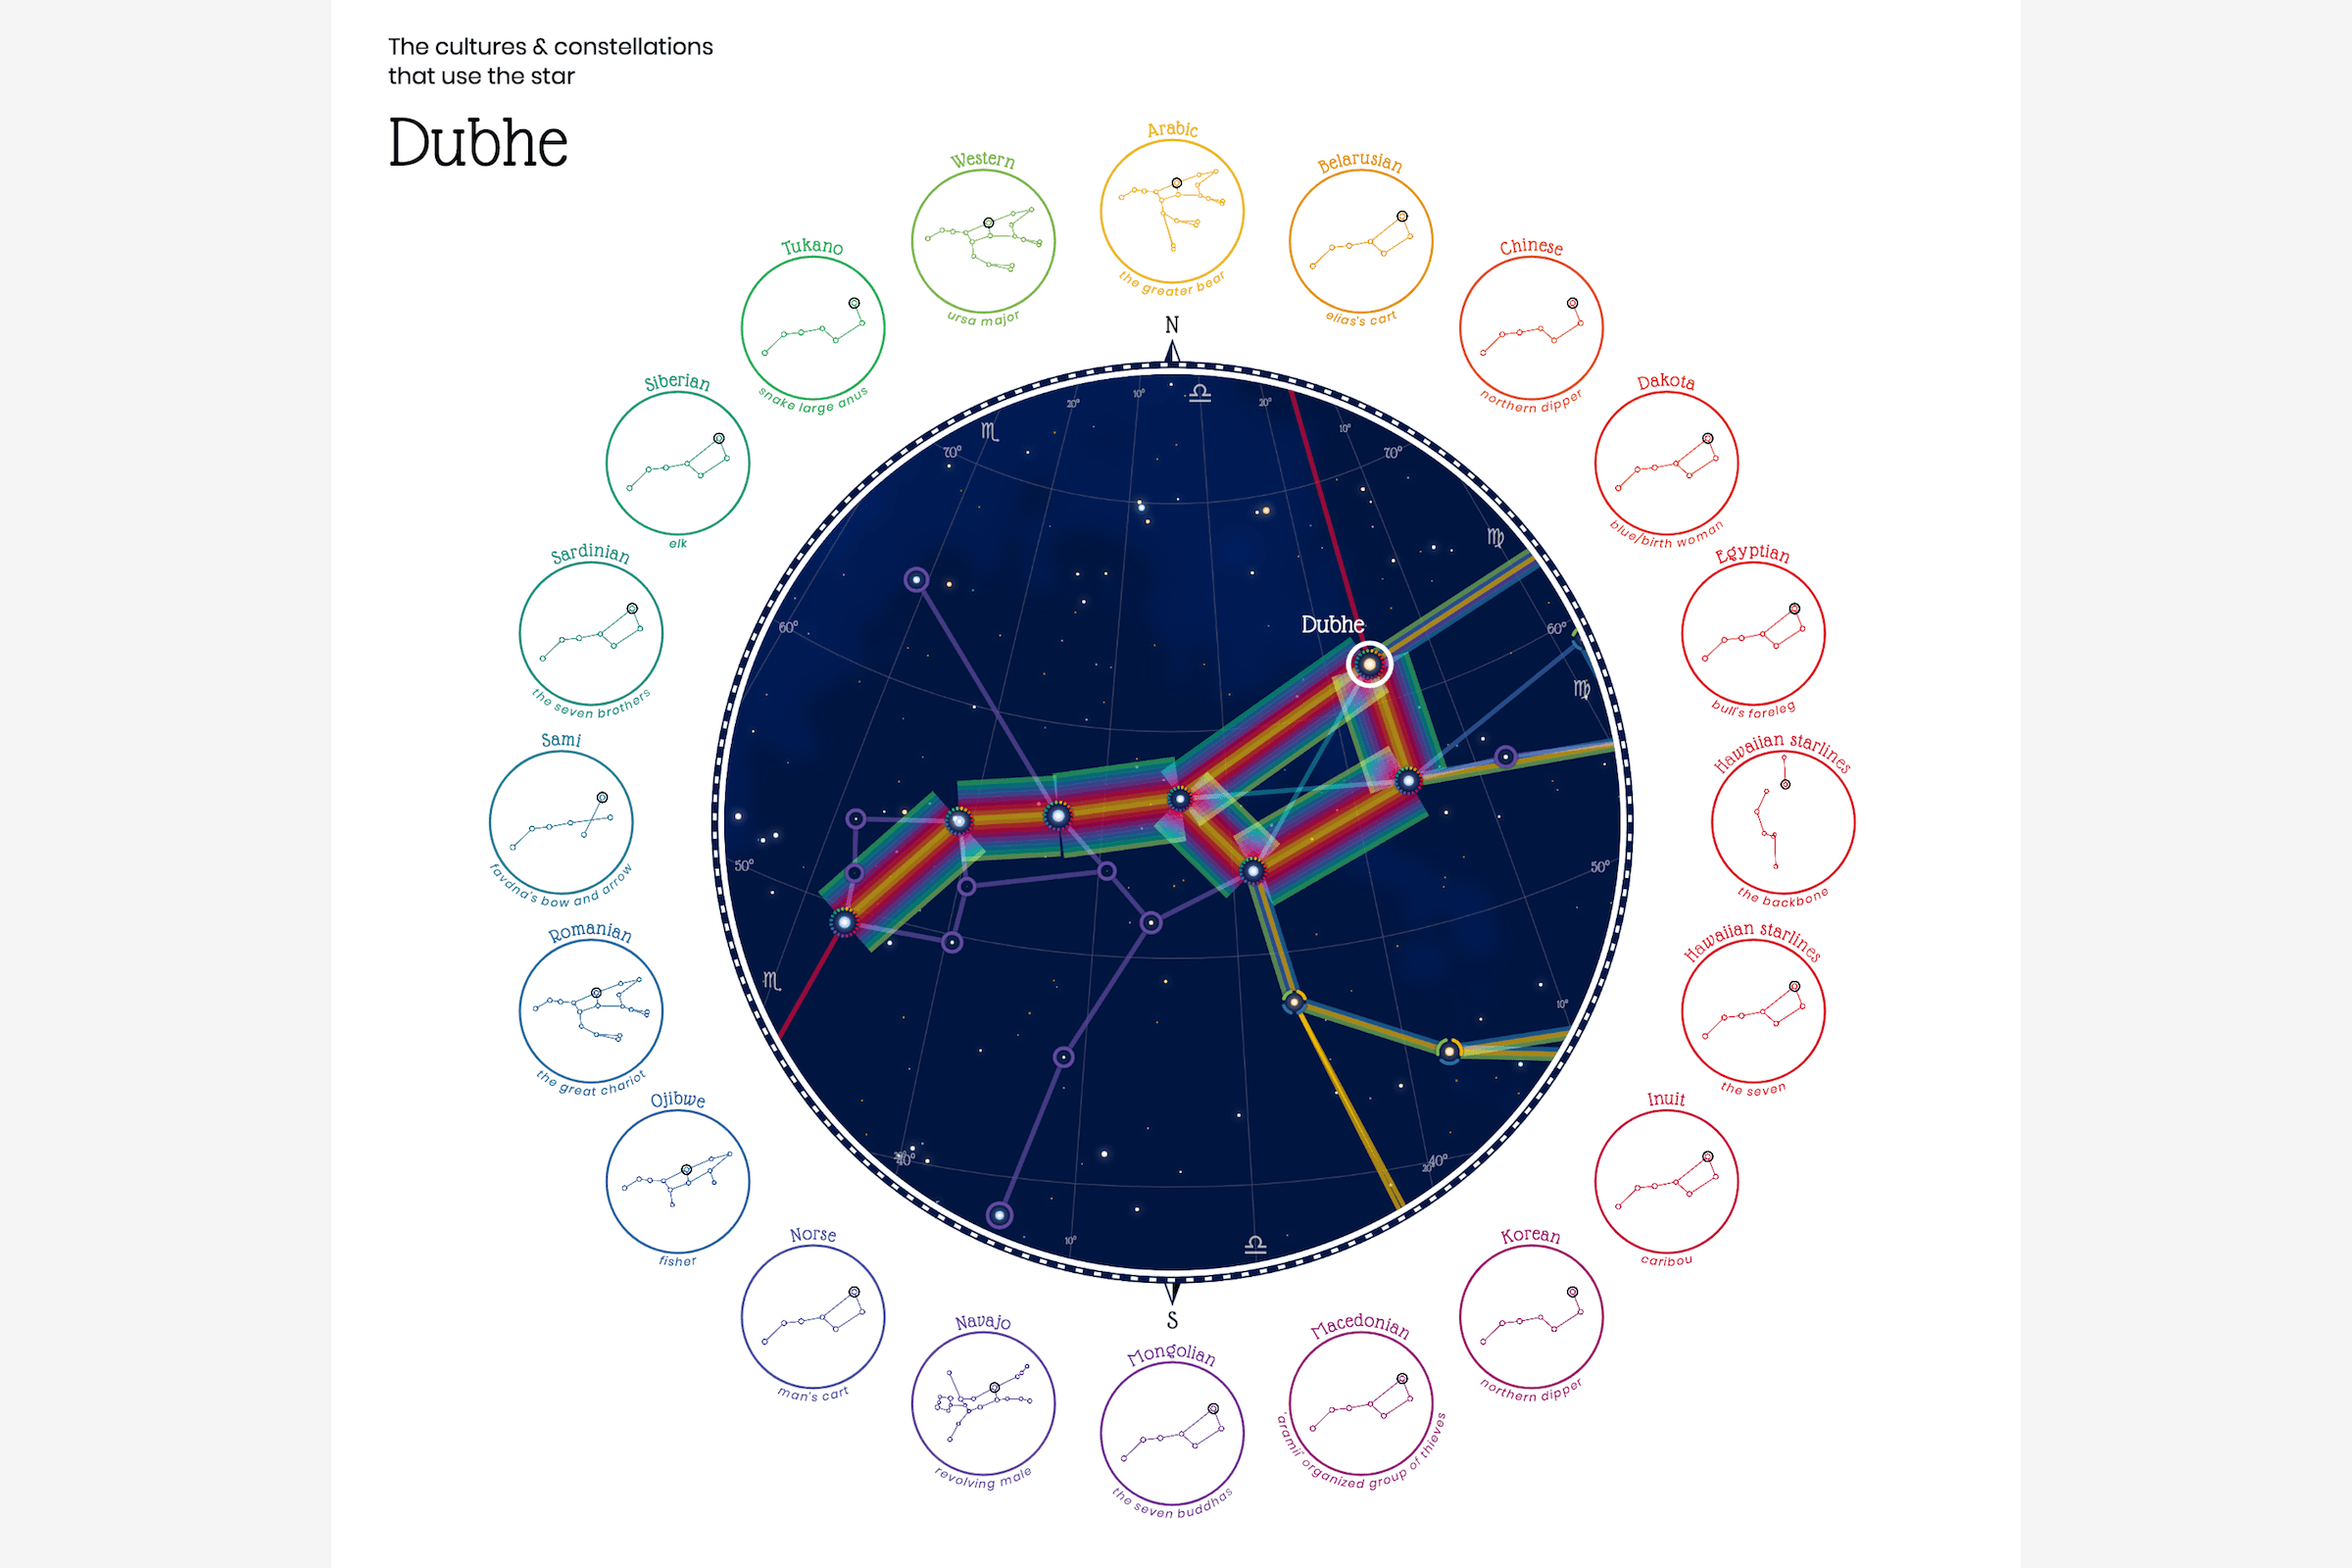 The circular sky map showing the star Dubhe